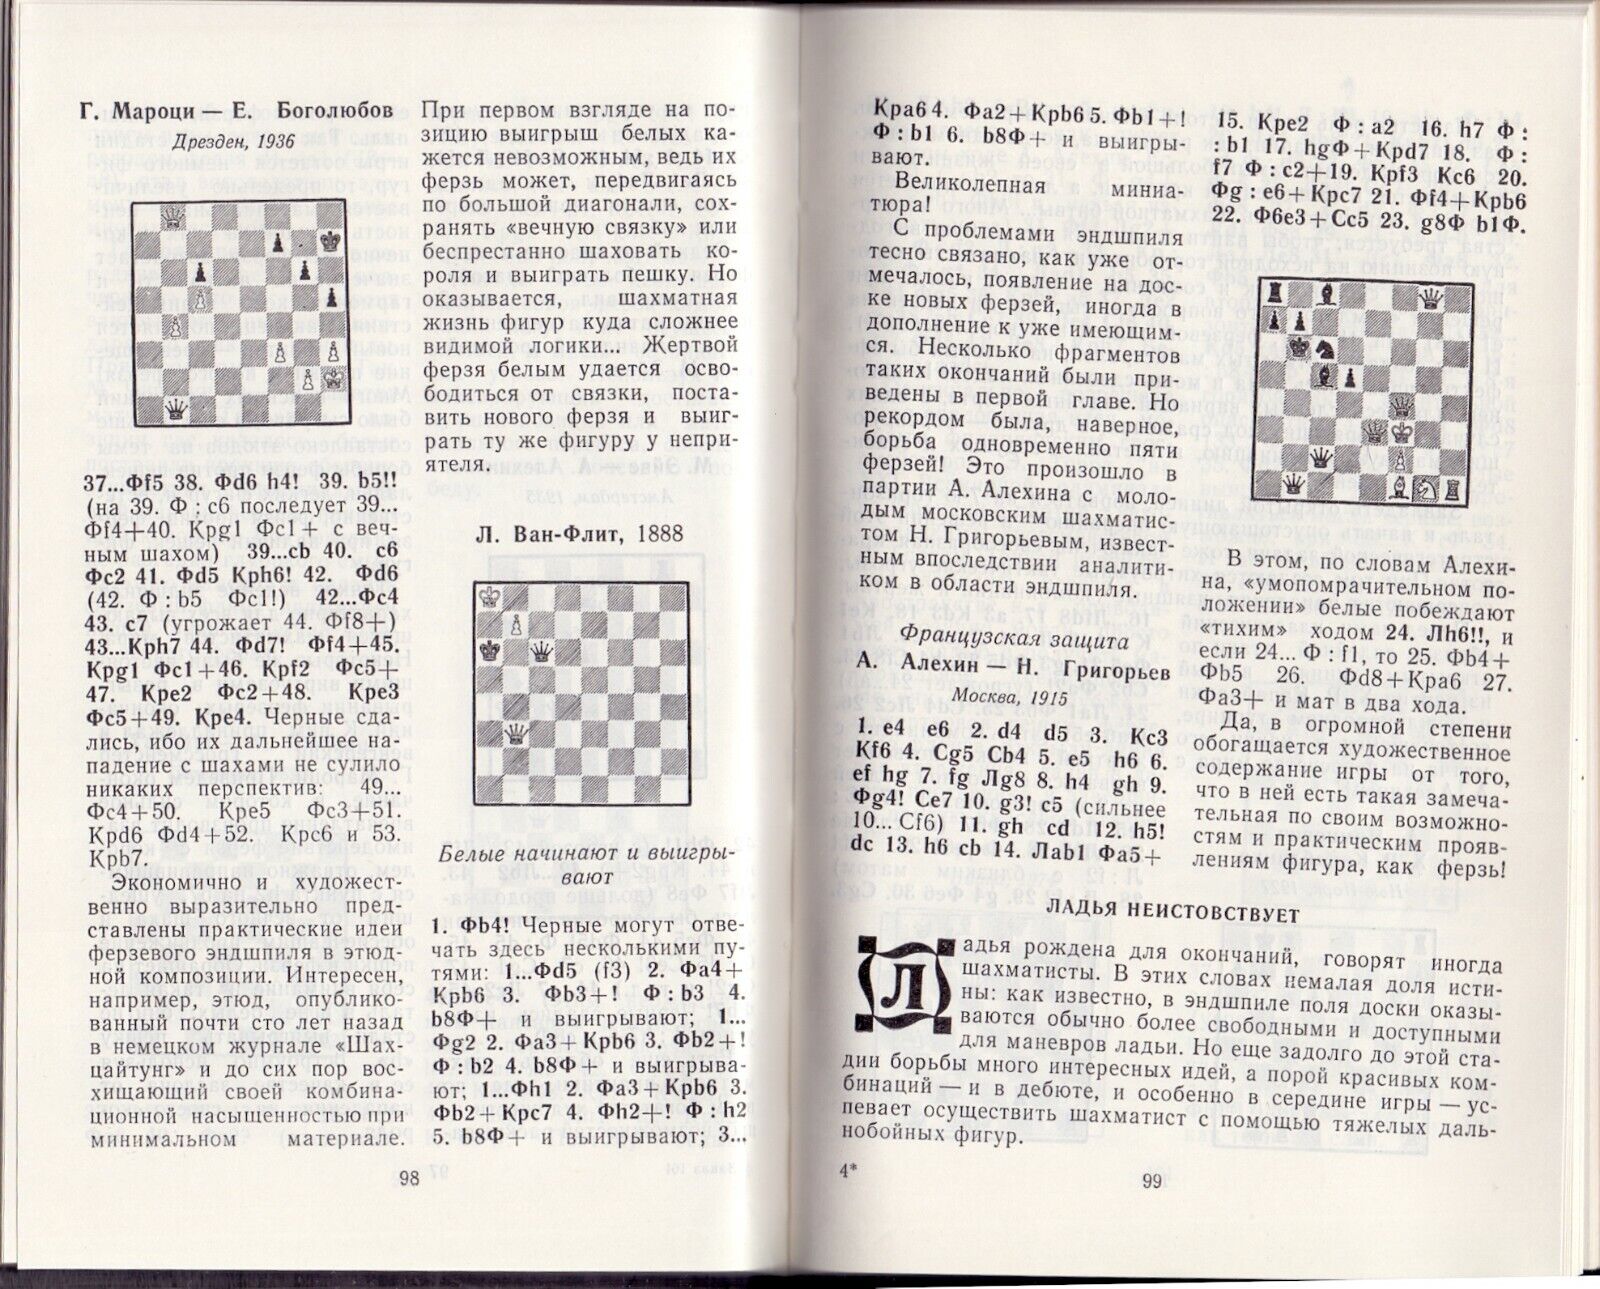 10963.Book signed by I. Linder. The aesthetics of chess.1981.Baturinsky-Karpov library